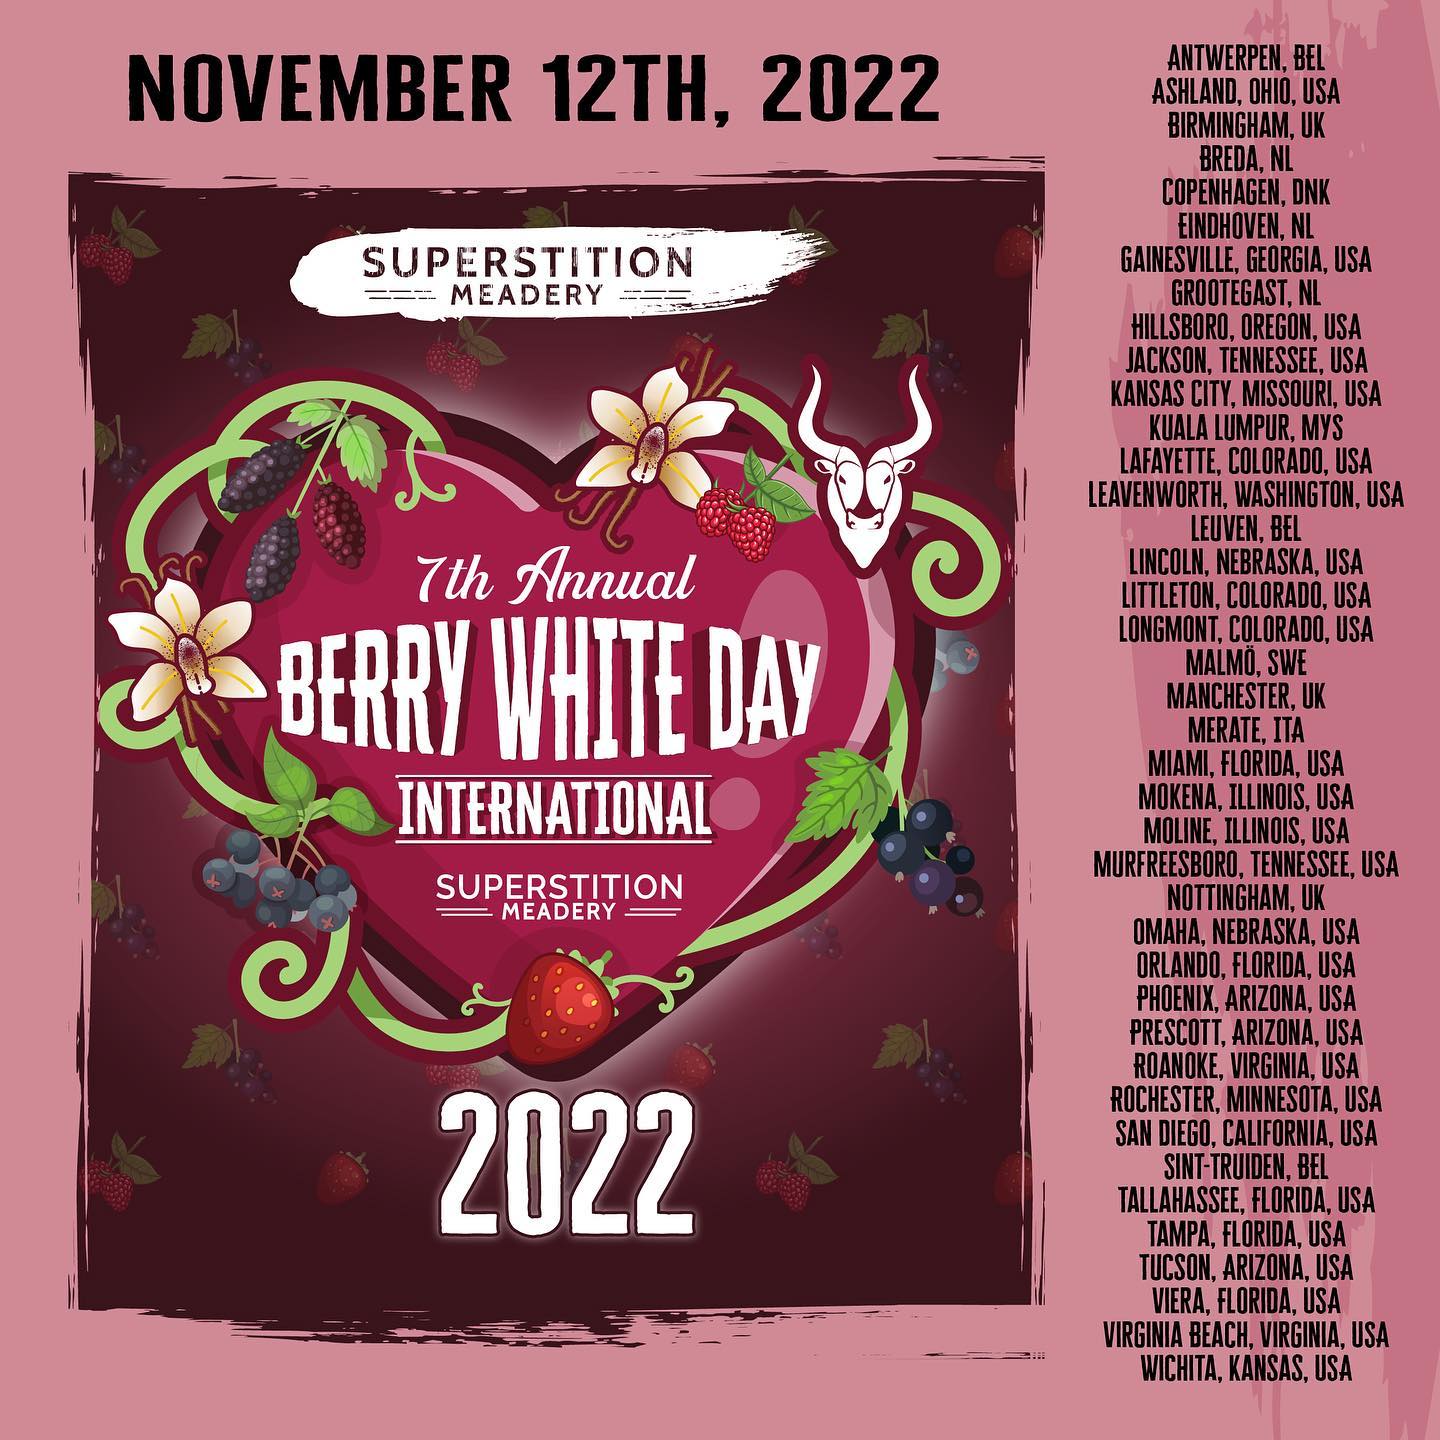 Tomorrow, we will be hosting @superstitionmeadery for their annual Berry White Day! We will have all four of the Berry White releases available for glass pours as well as bottles to go! 
.
.
.
.
.
#wildwoodtap #wildwoodtaphouse #superstitionmeadery #mead #berrywhiteday #berrywhiteday2022 #pnw #pnwbeer #pdx #pdxbeer #hillsborooregon